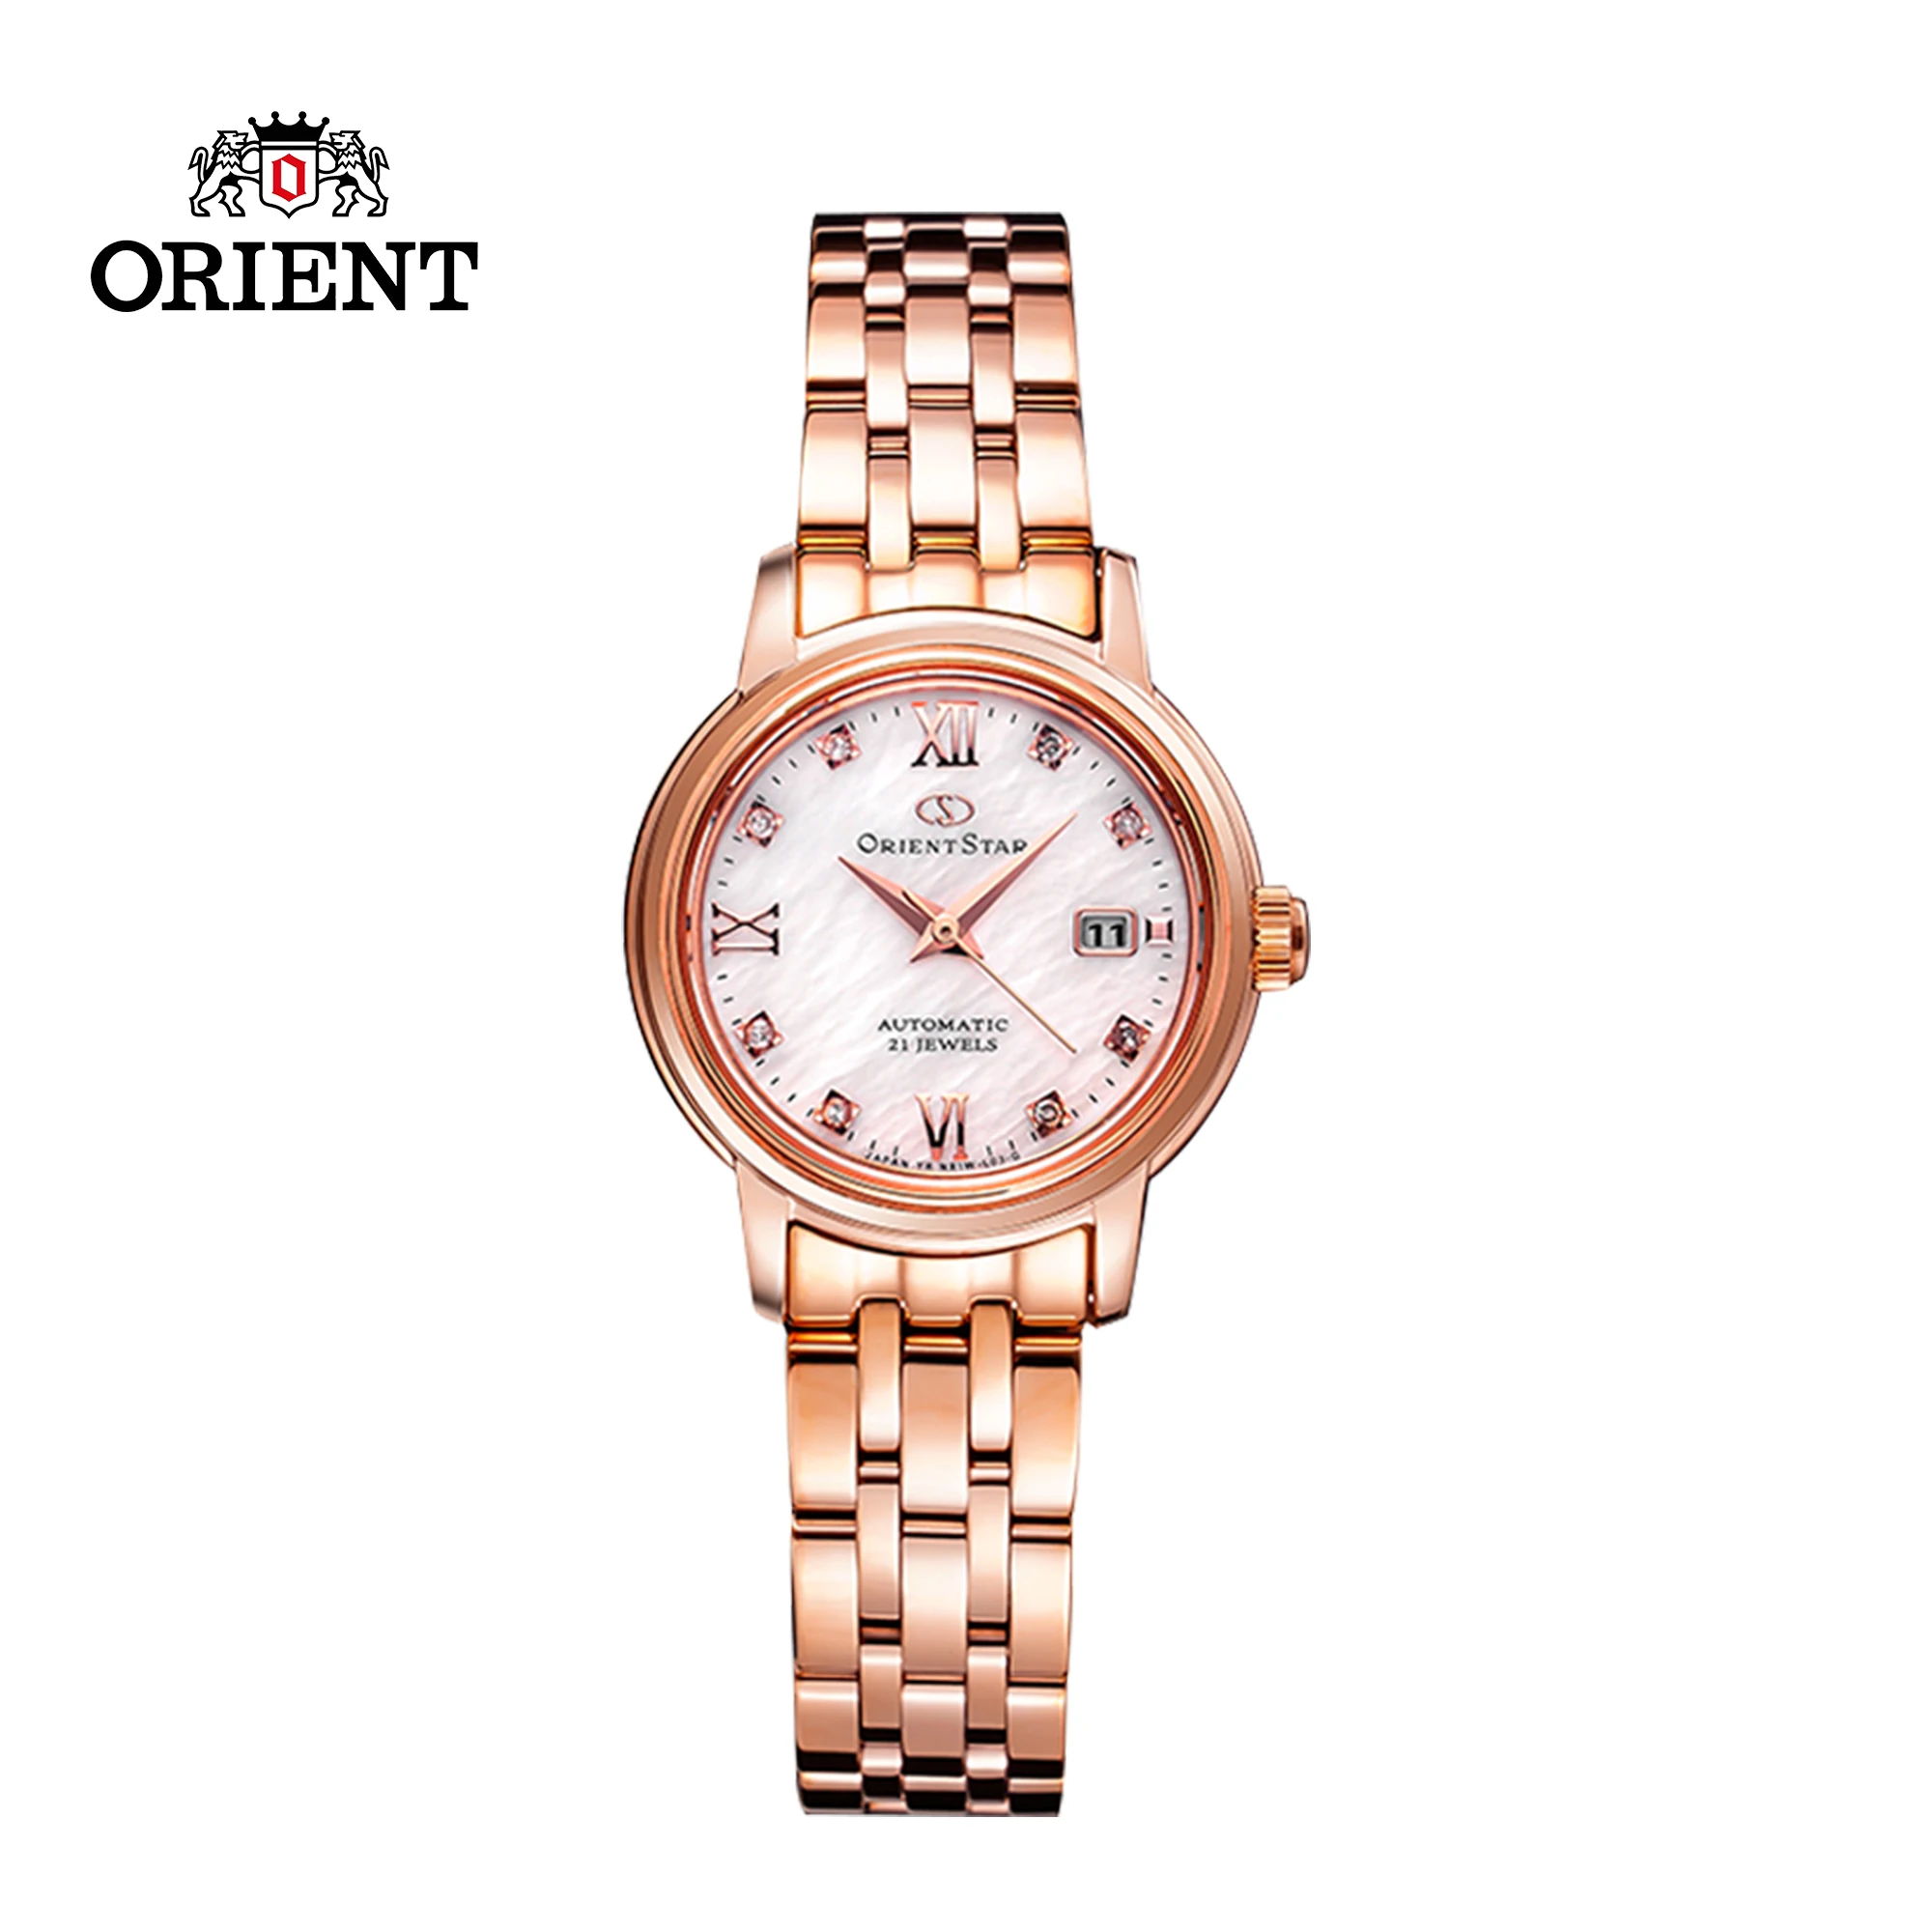 ORIENT STAR Women's Dress Watch, 29mm White Mother of Pearl Sapphire Crystal Dial Japanese Watch Automatic Watch /WZ04 enlarge